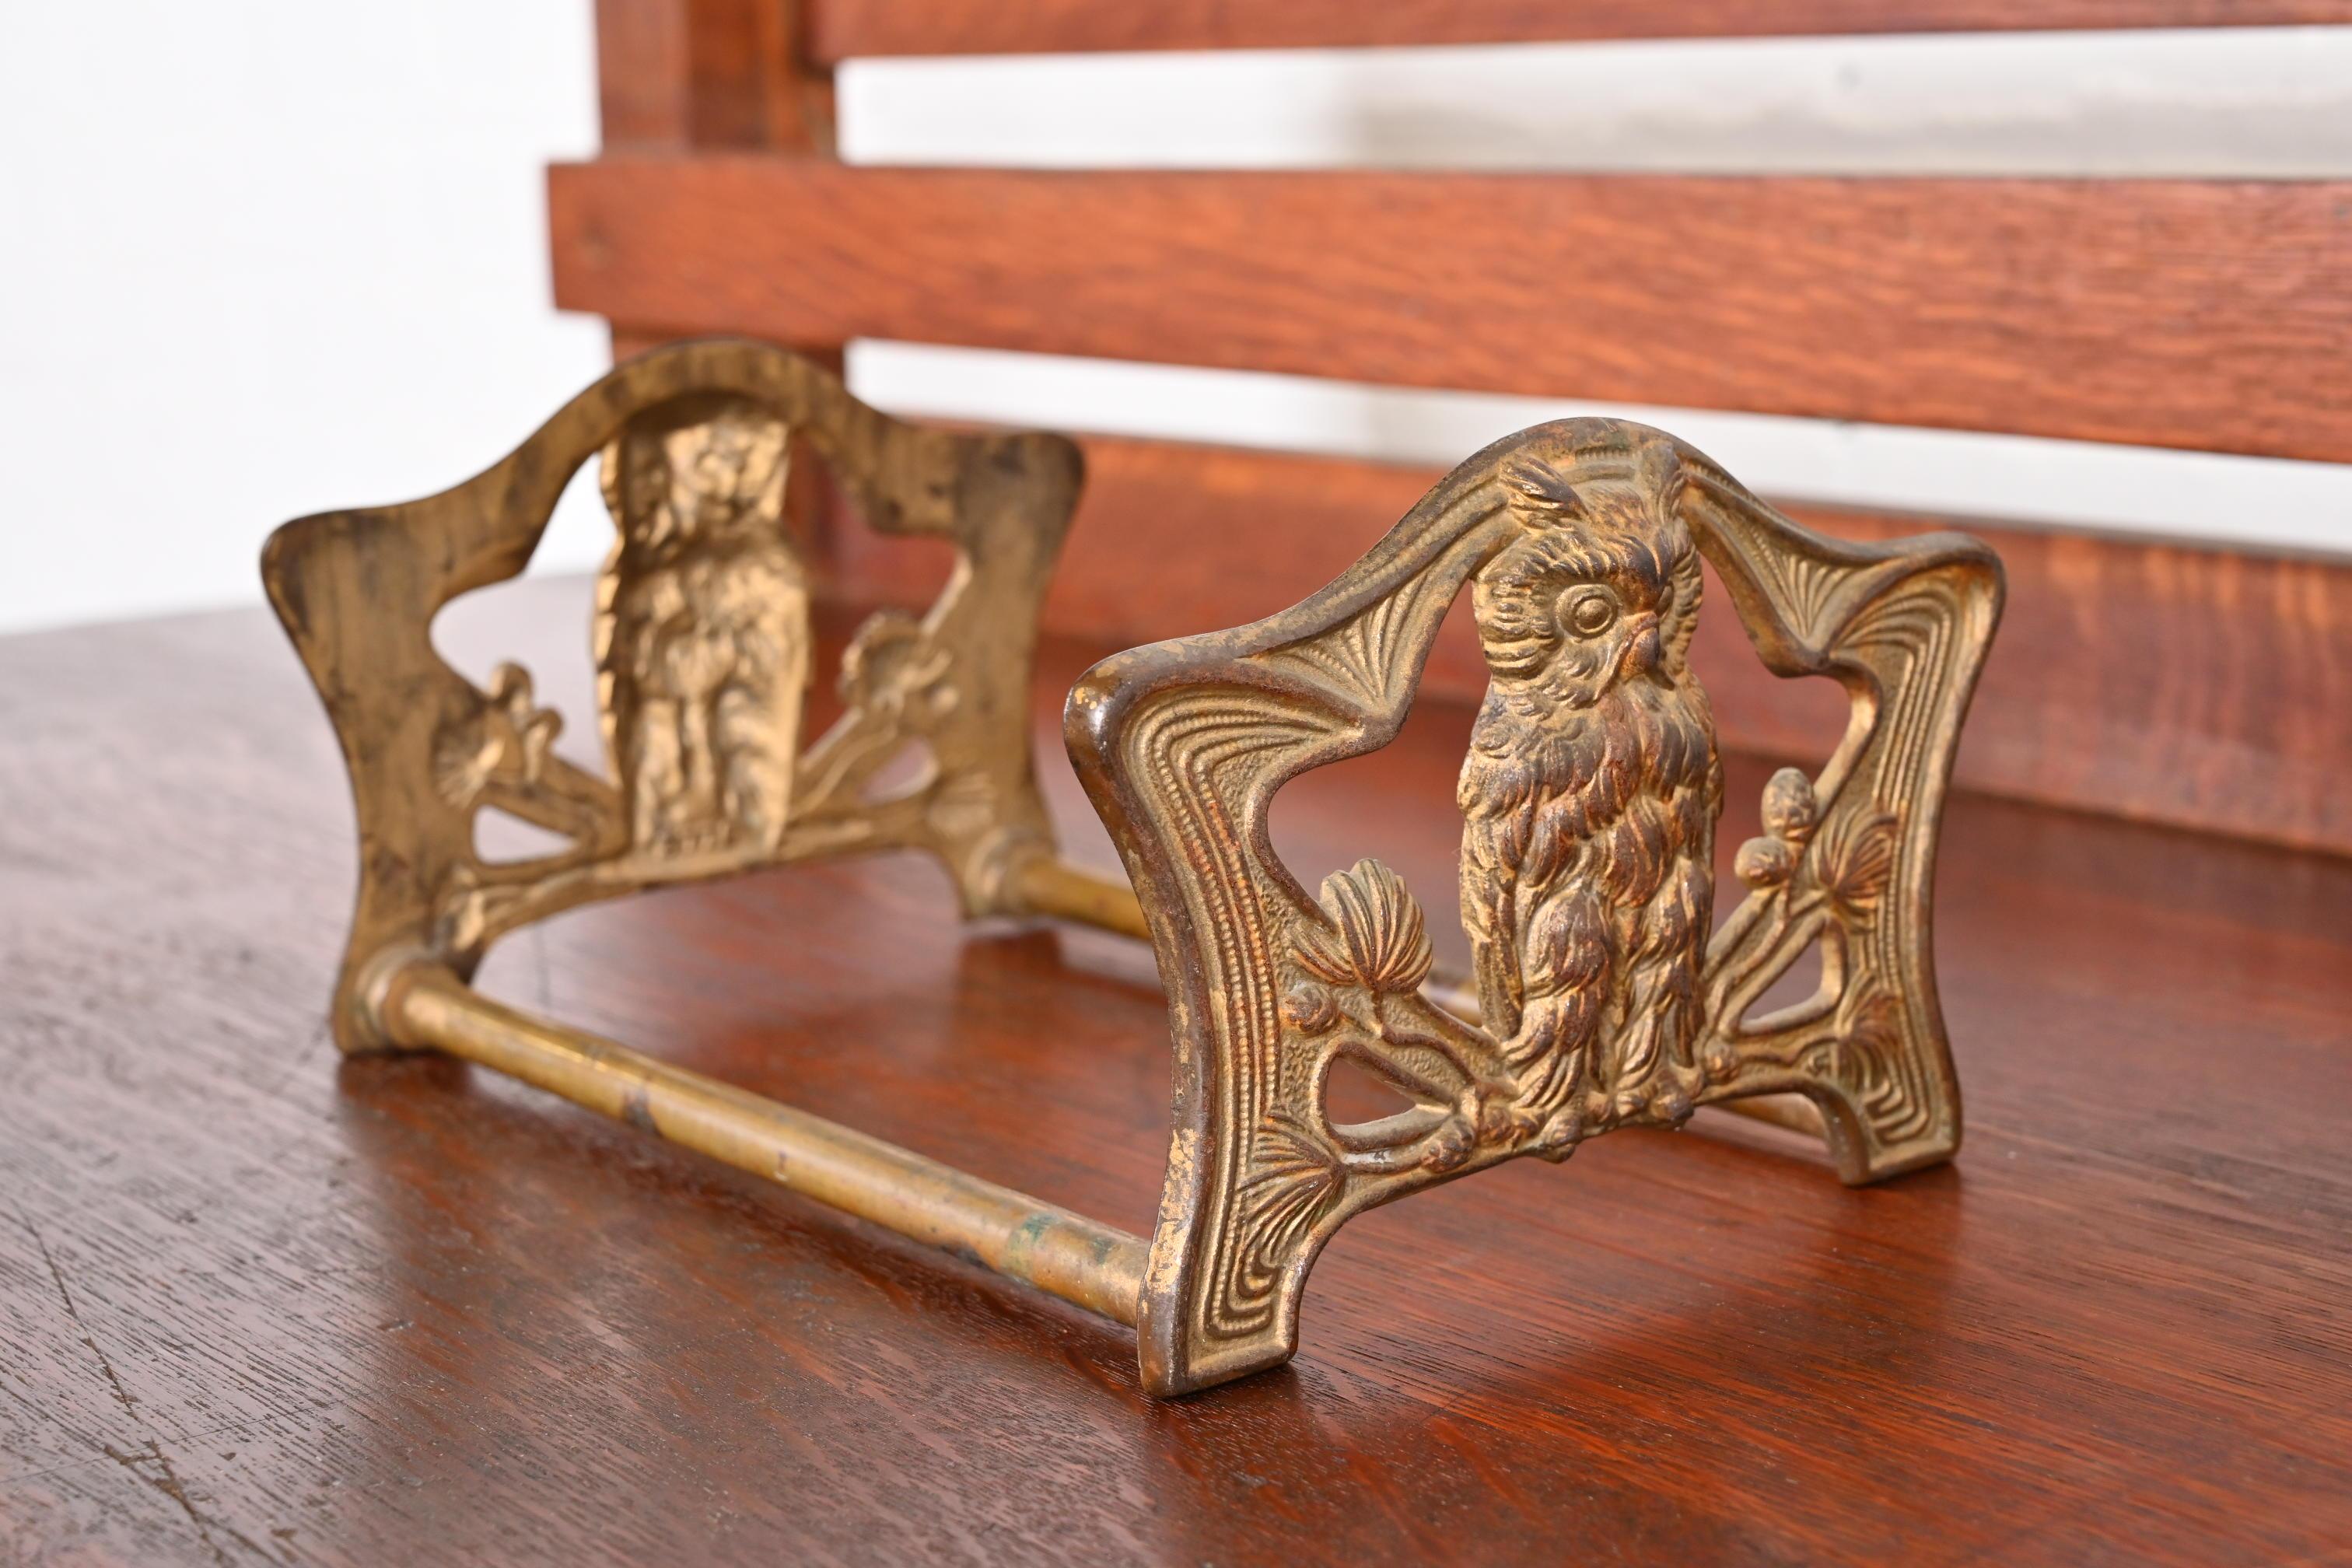 A gorgeous Art Nouveau period bronze expandable book rack or bookends with owl motif

In the manner of Bradley & Hubbard

USA, Early 20th Century

Measures: 9.5